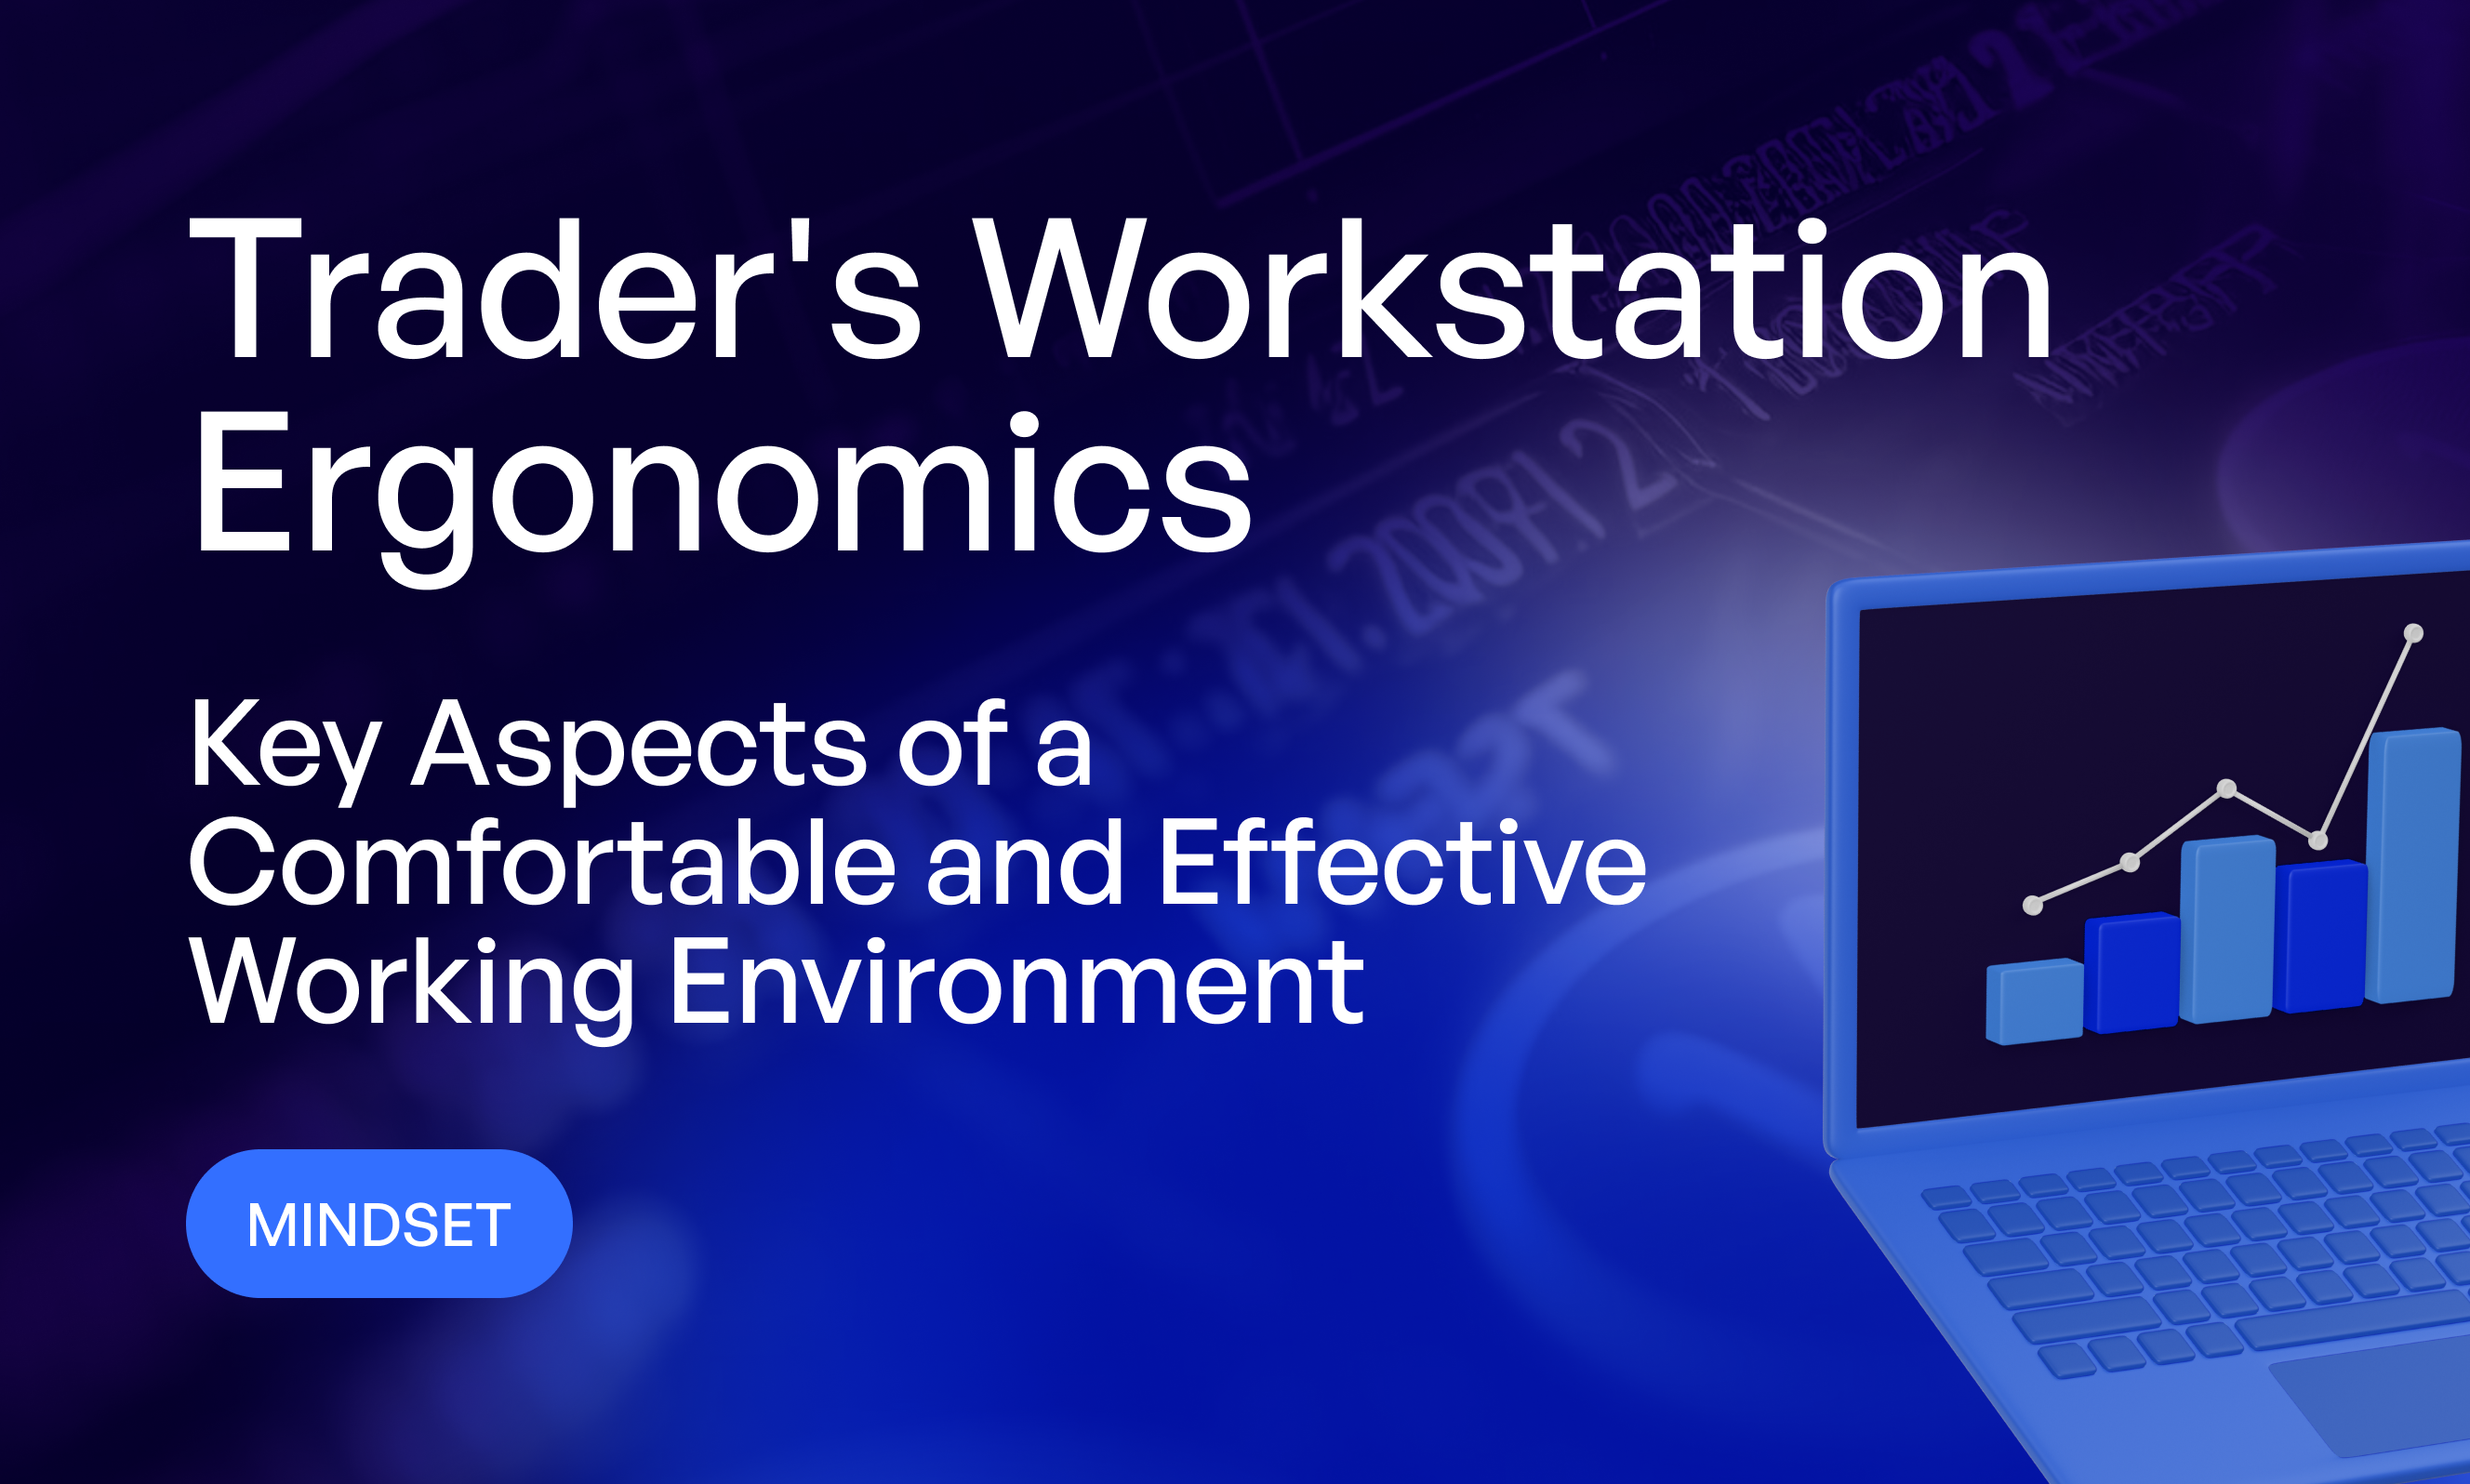 Trader’s Workstation: Key Aspects of a Comfortable and Effective Working Environment